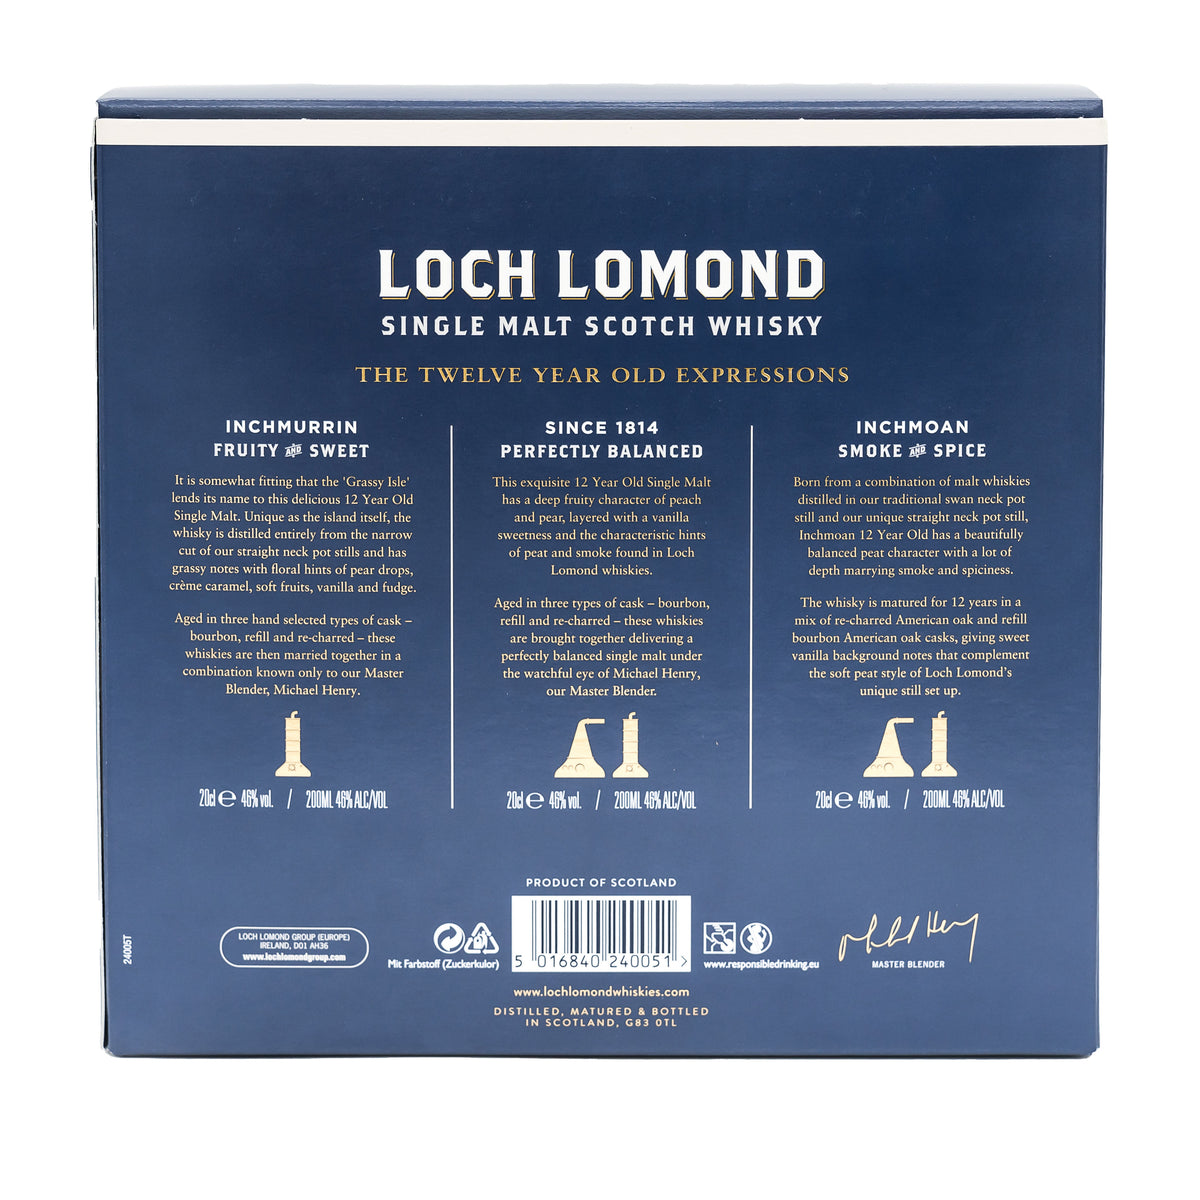 Loch Lomond 12 Year Old Whisky Miniatures Gift Set (3x5cl)